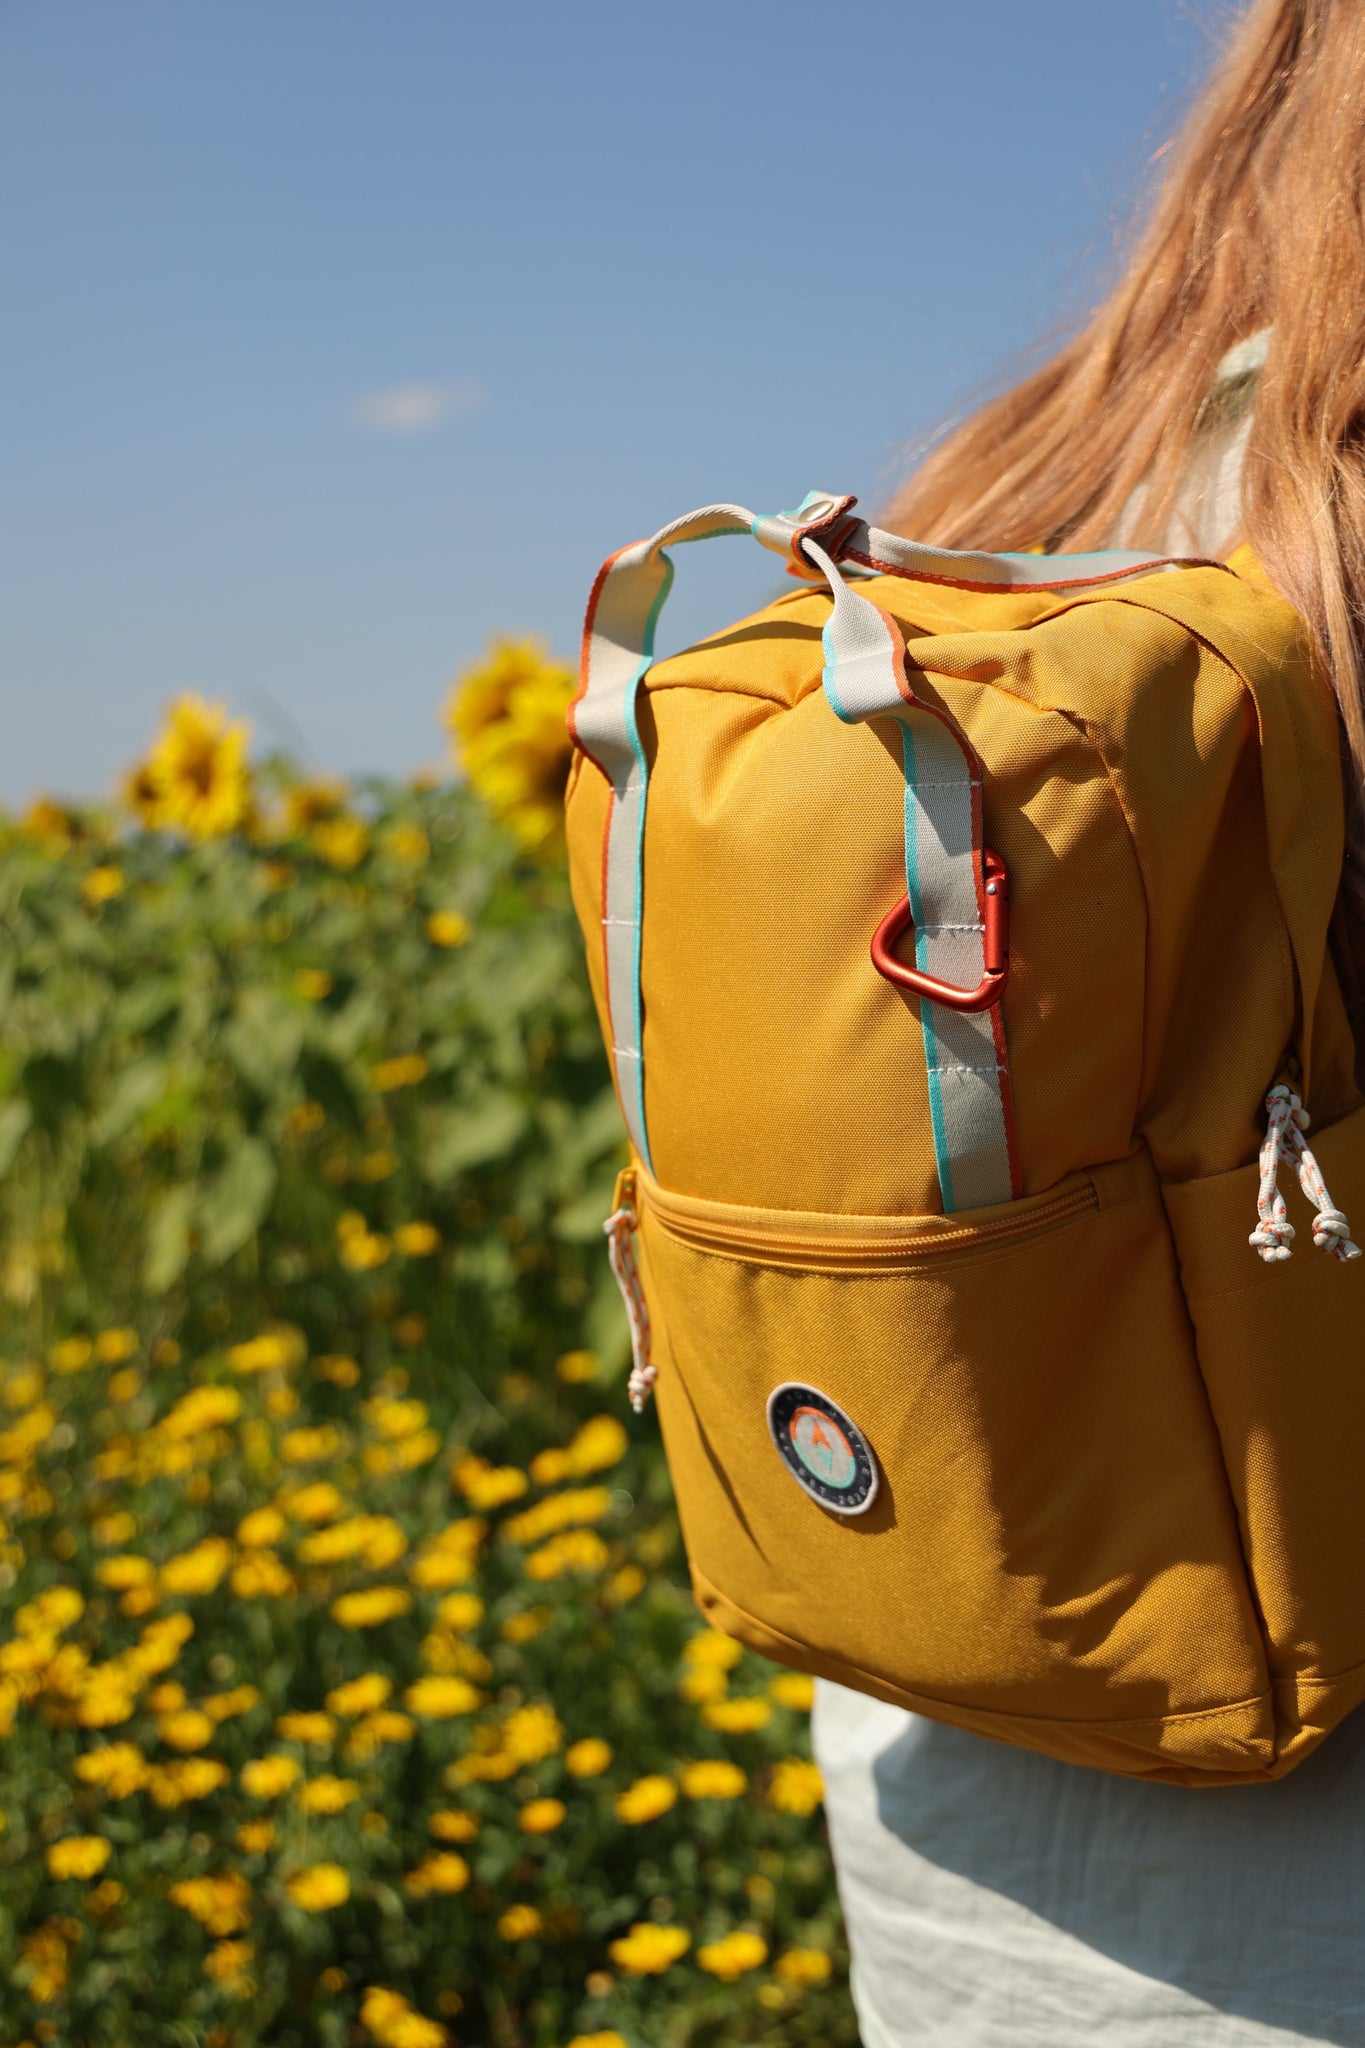 Explorer Recycled Backpack